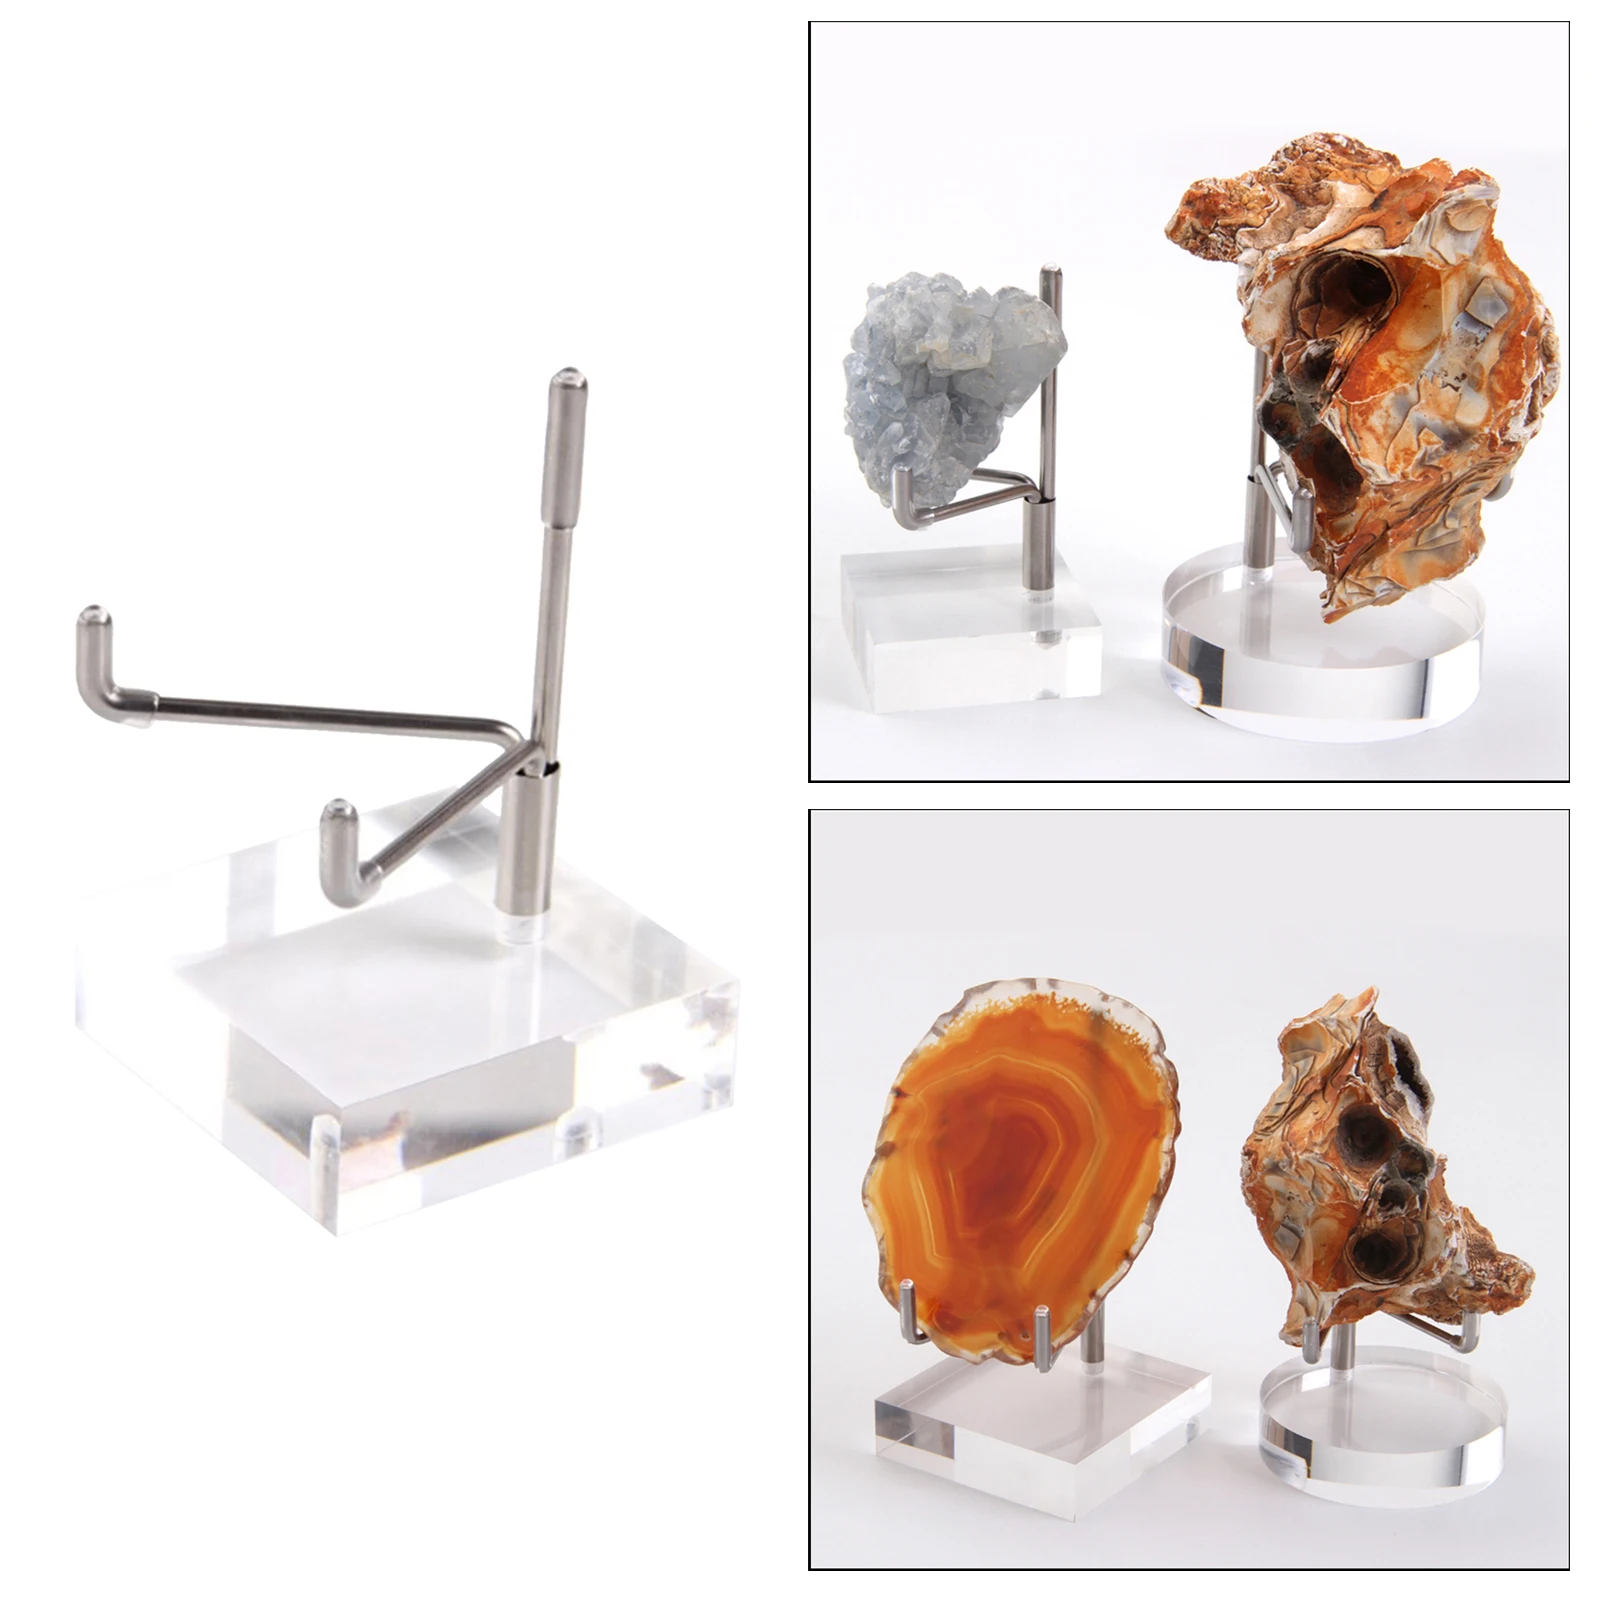 Durable Acrylic Display Stand Holder Shelf for Fossils Minerals Rocks Geode Crystal Seashells Collectibles